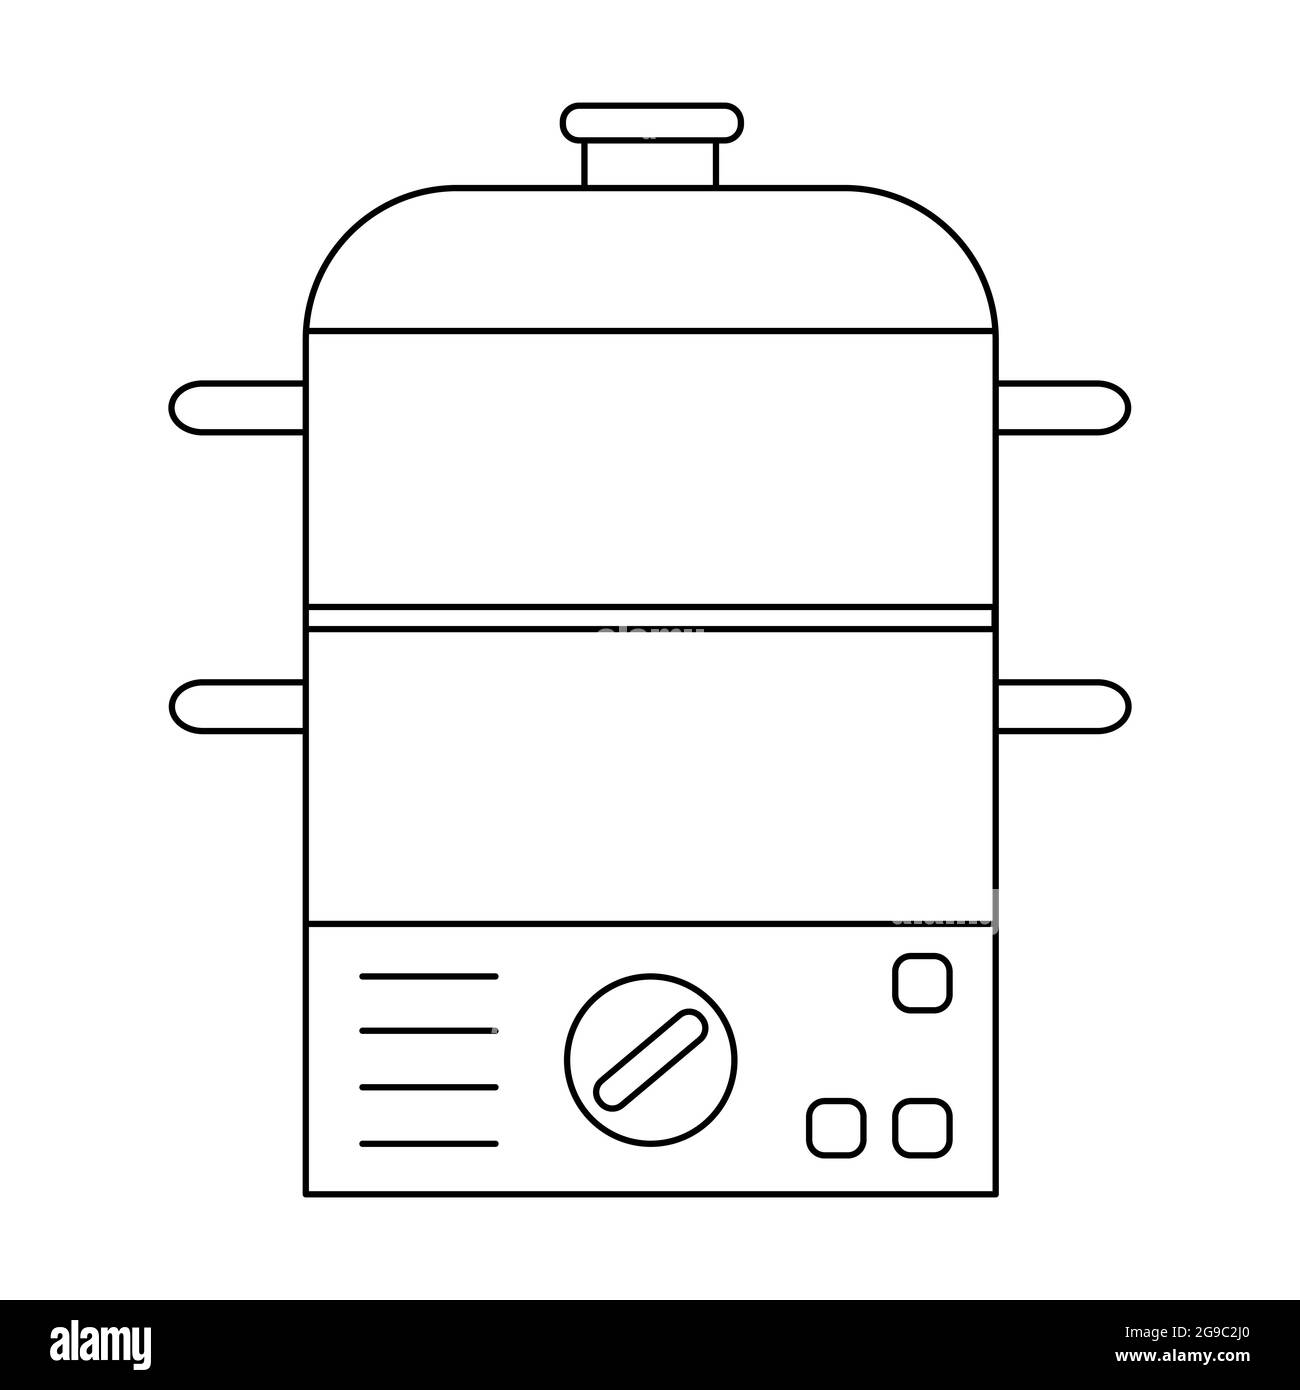 Electric food steamer outline icon. Thin line vector sign isolated on white background. Illustration for web design. Small appliance for kitchen. Hous Stock Vector